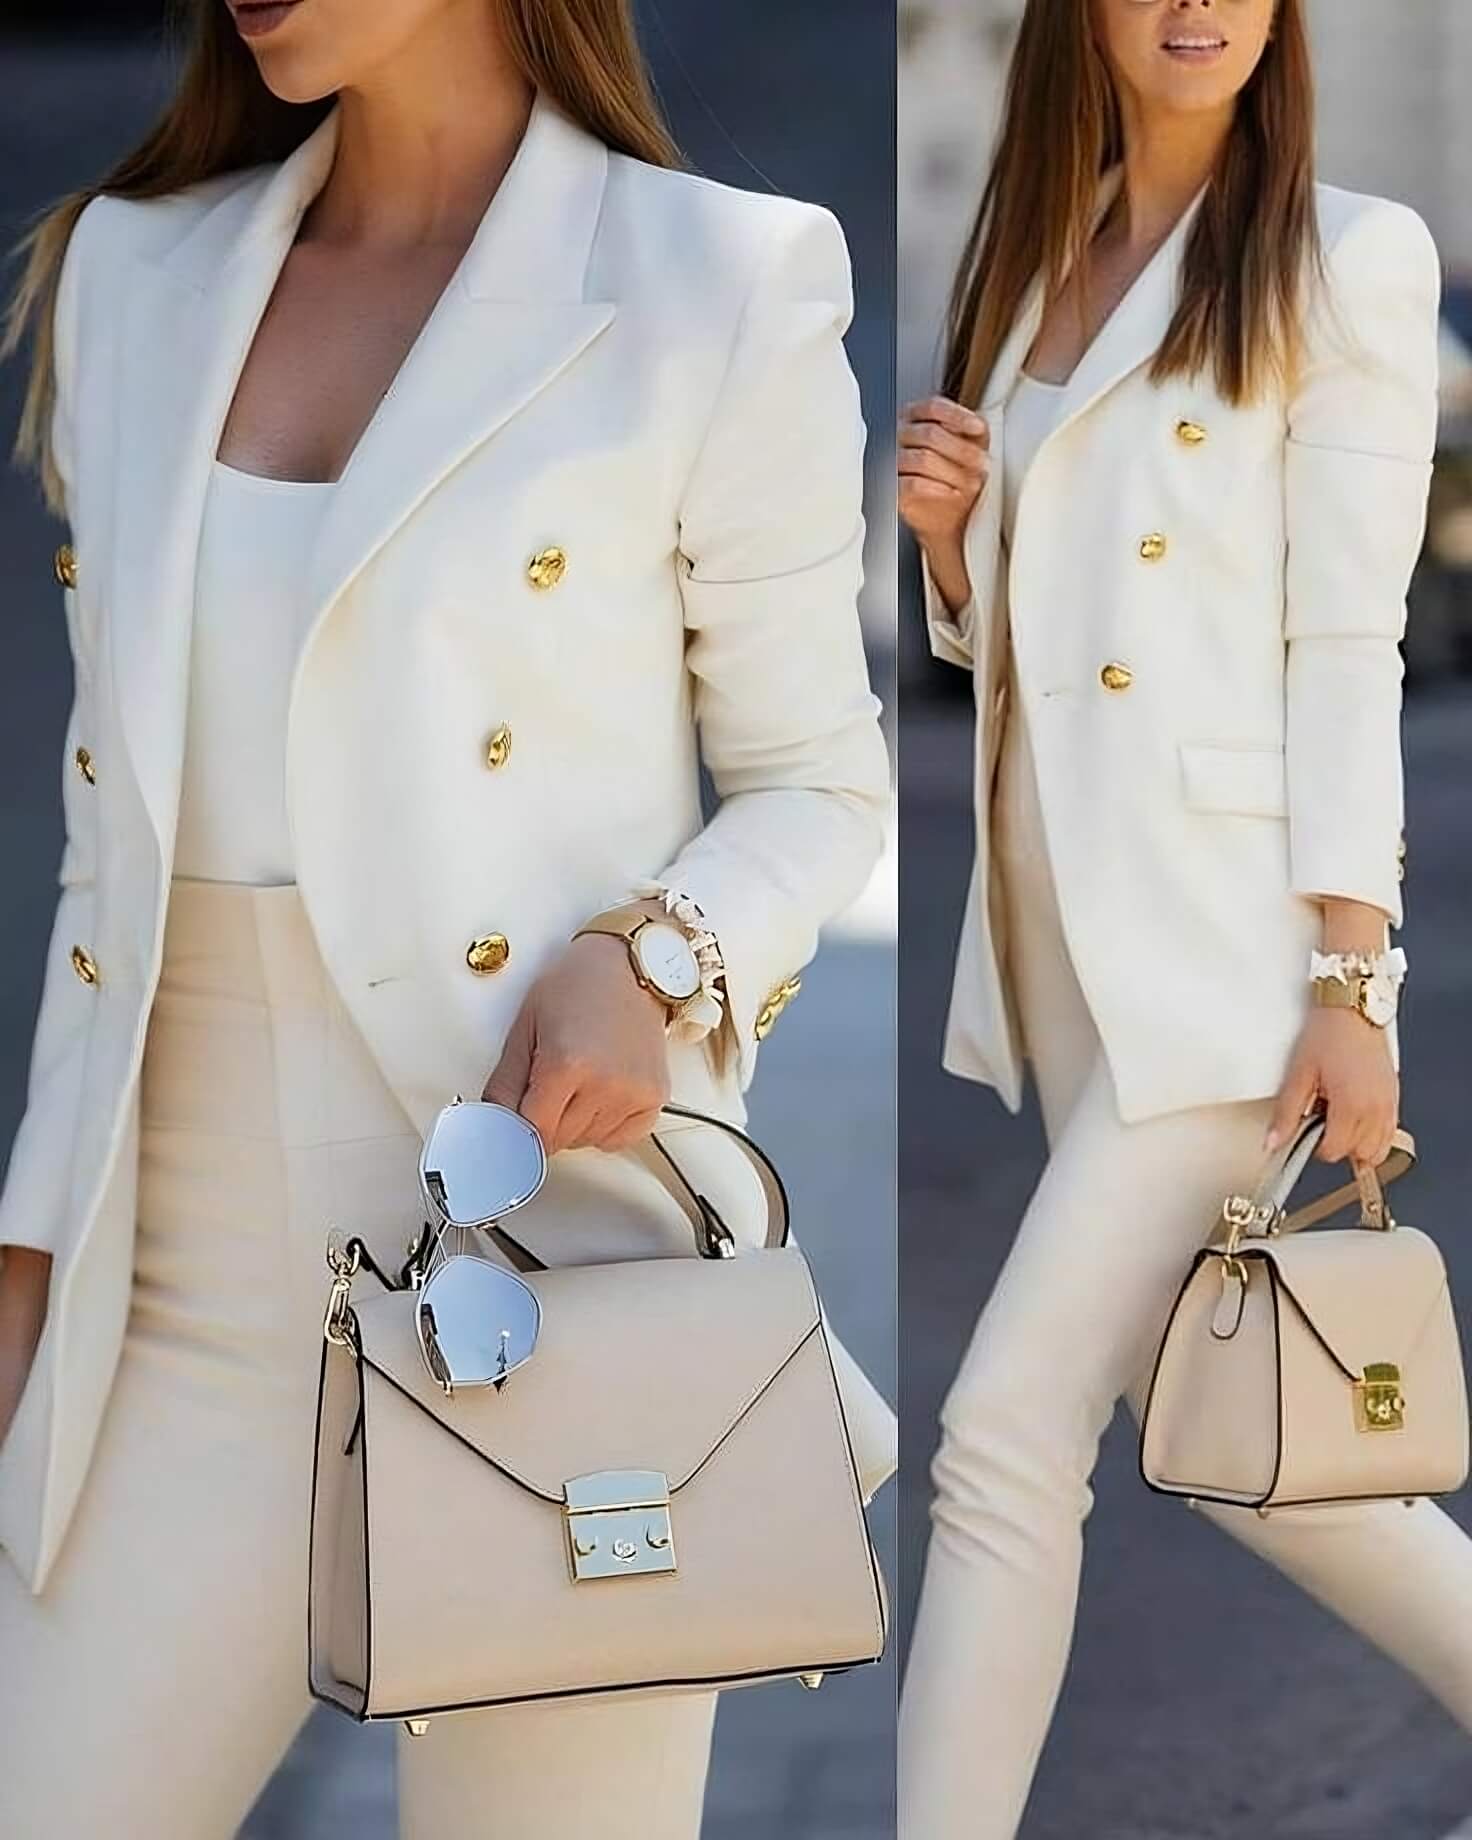 8 Fashion Hacks To Make Your Cheapest Clothes Look Like A Millionaire’s Outfits - 387